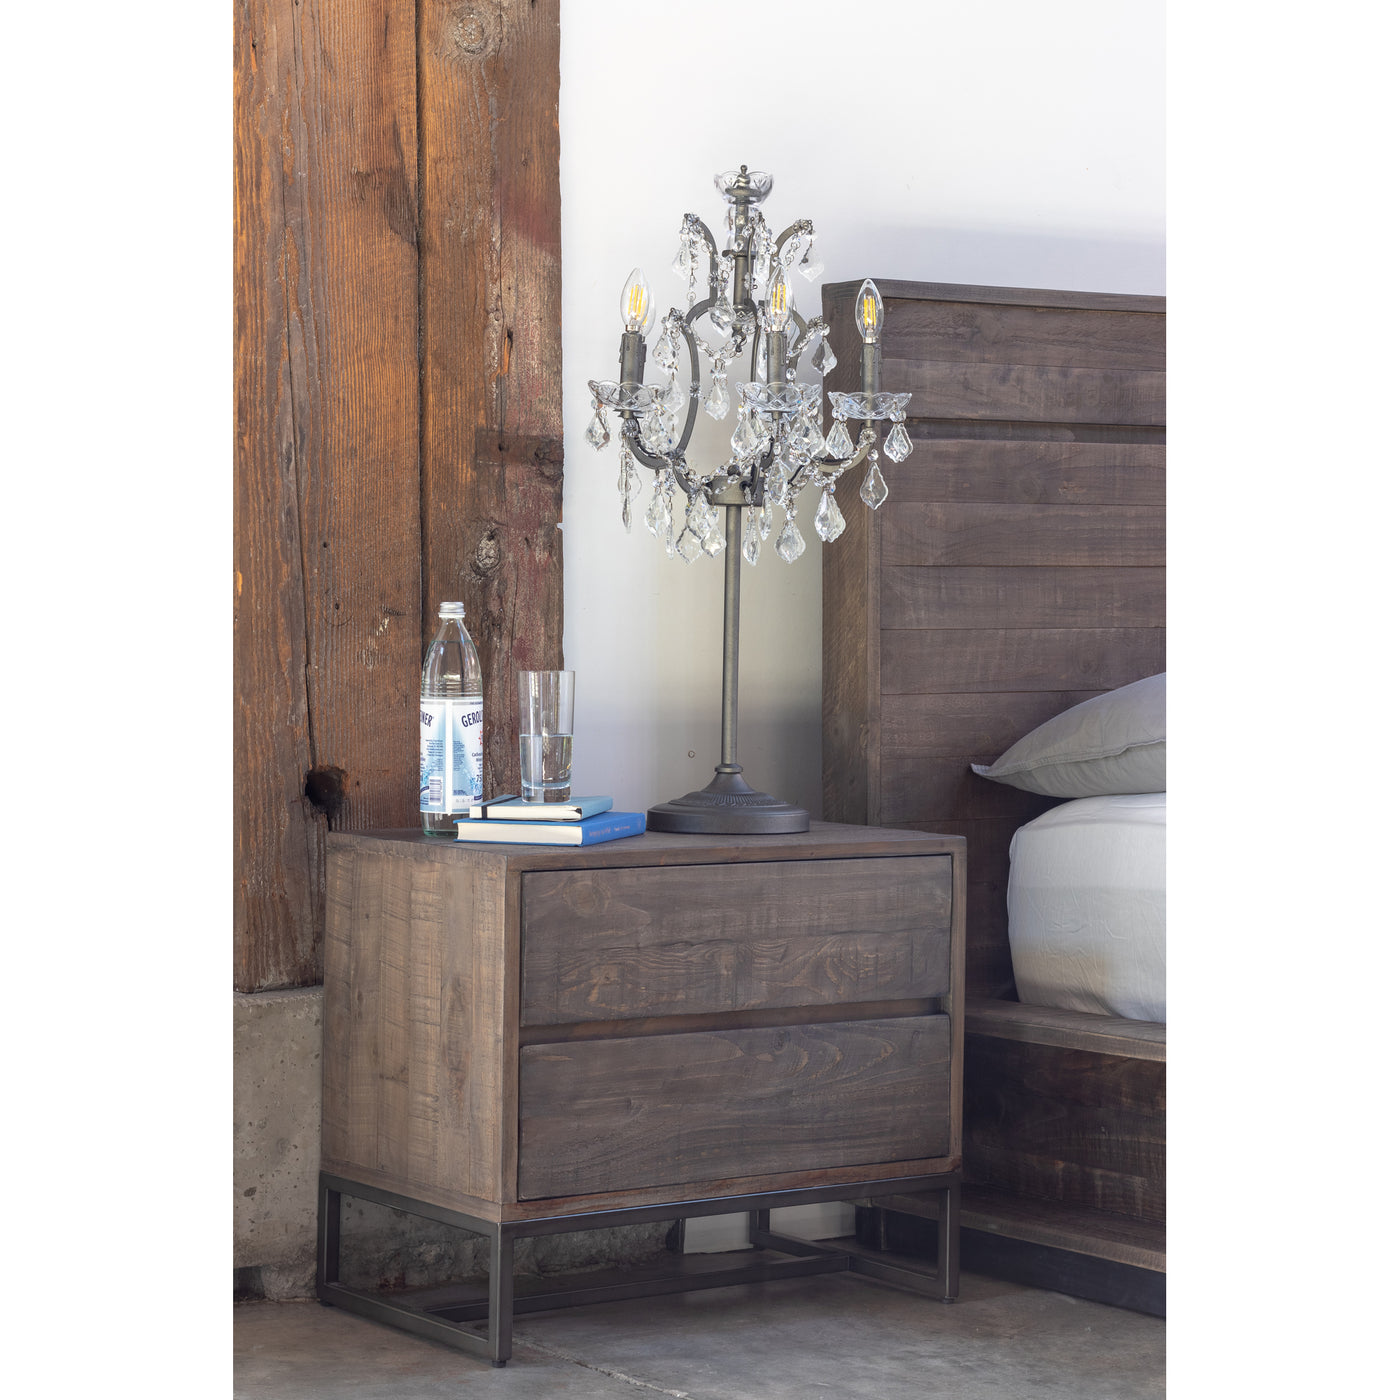 Give your bedroom a uniform industrial look with a rustic feel. Clean lines and industrial detailing make the Elena Nights...